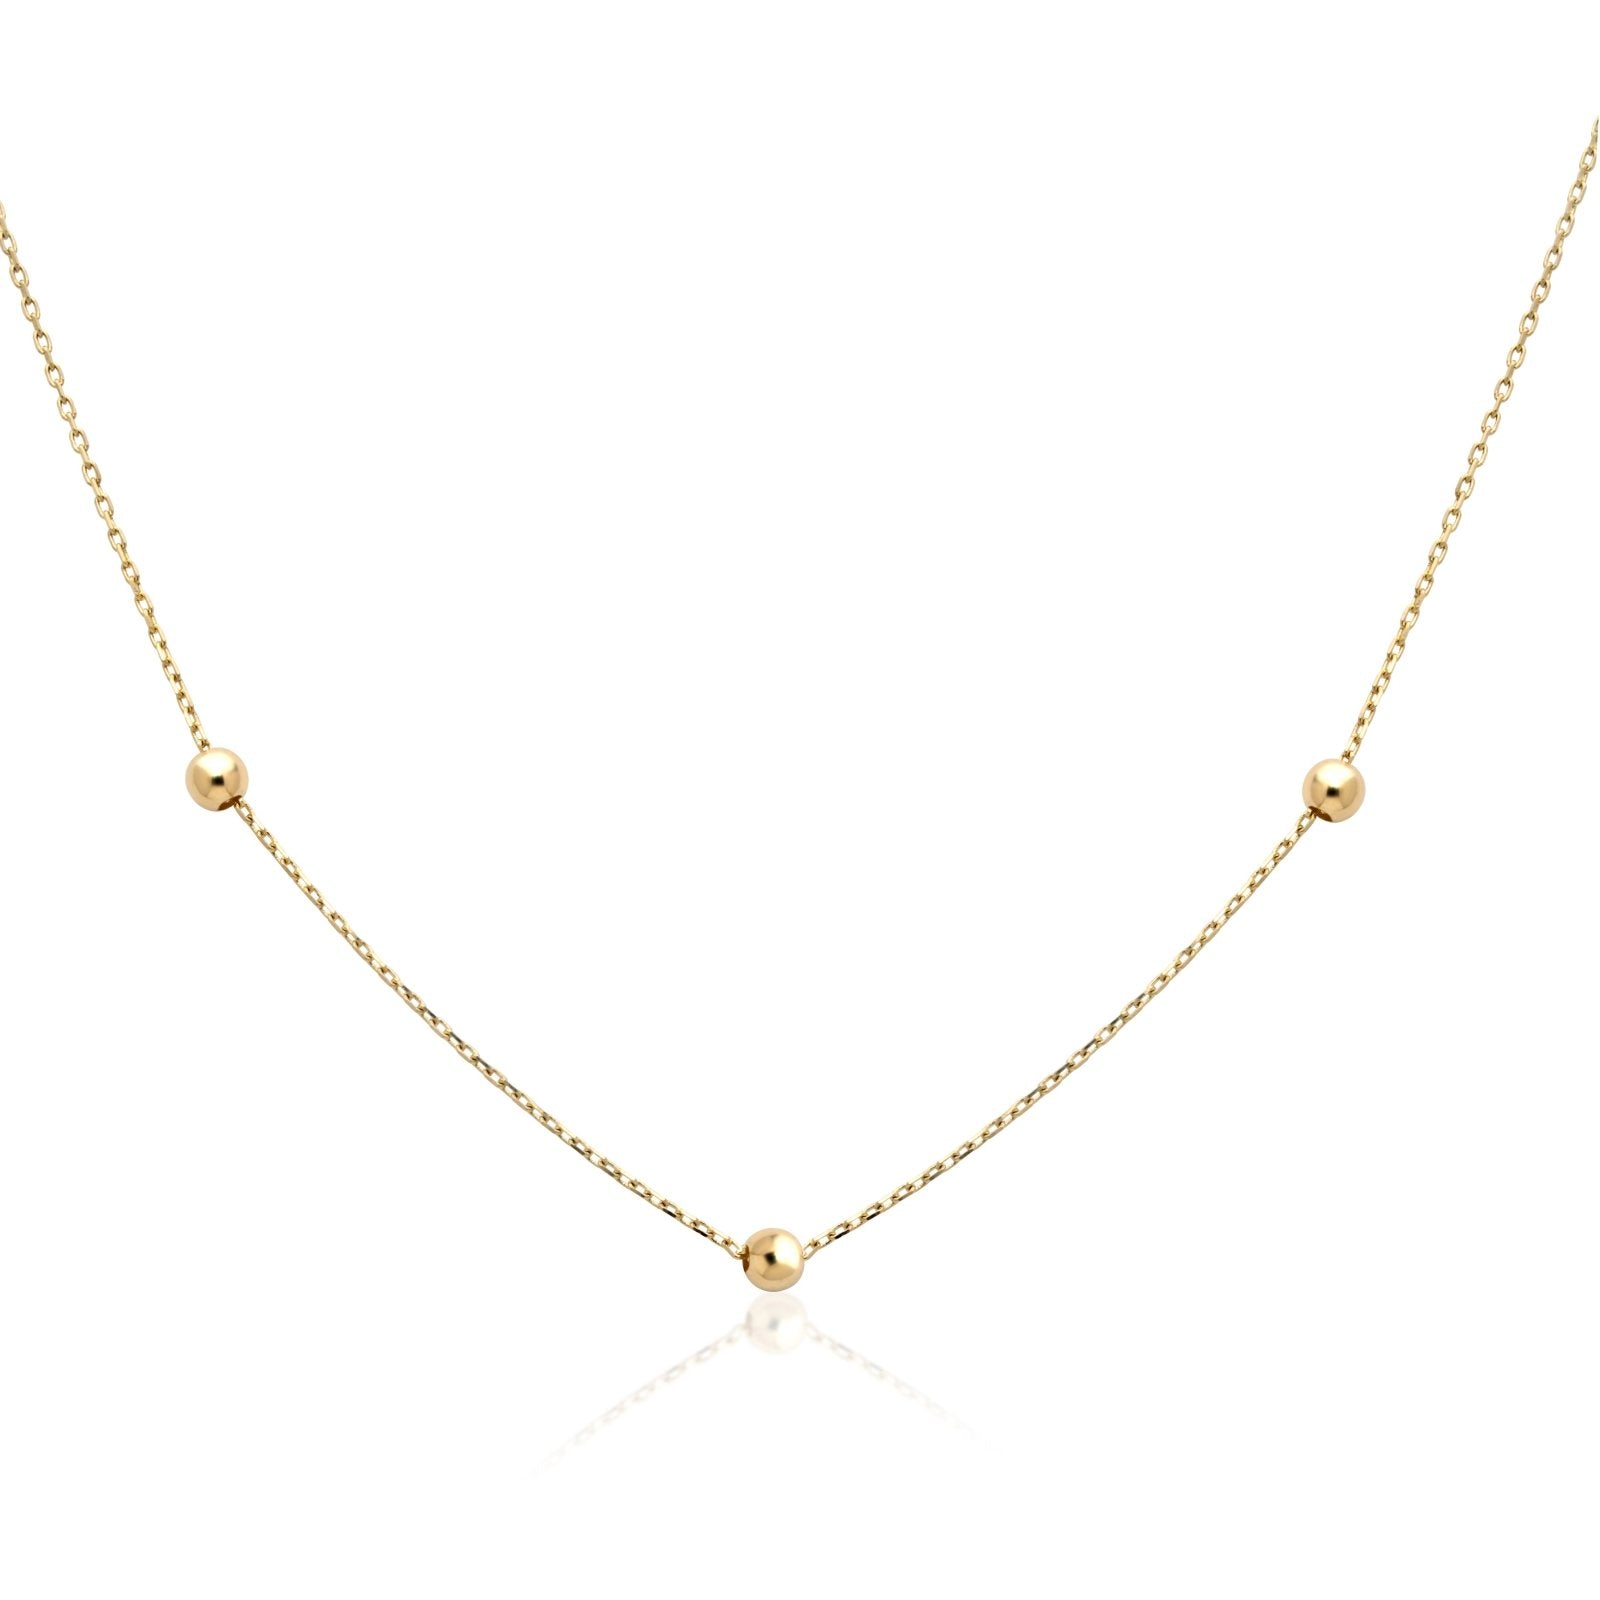 Beaded Station Necklace Necklaces Estella Collection #product_description# 17821 14k Layering Necklace Make Collection #tag4# #tag5# #tag6# #tag7# #tag8# #tag9# #tag10# 14K Yellow Gold 16"